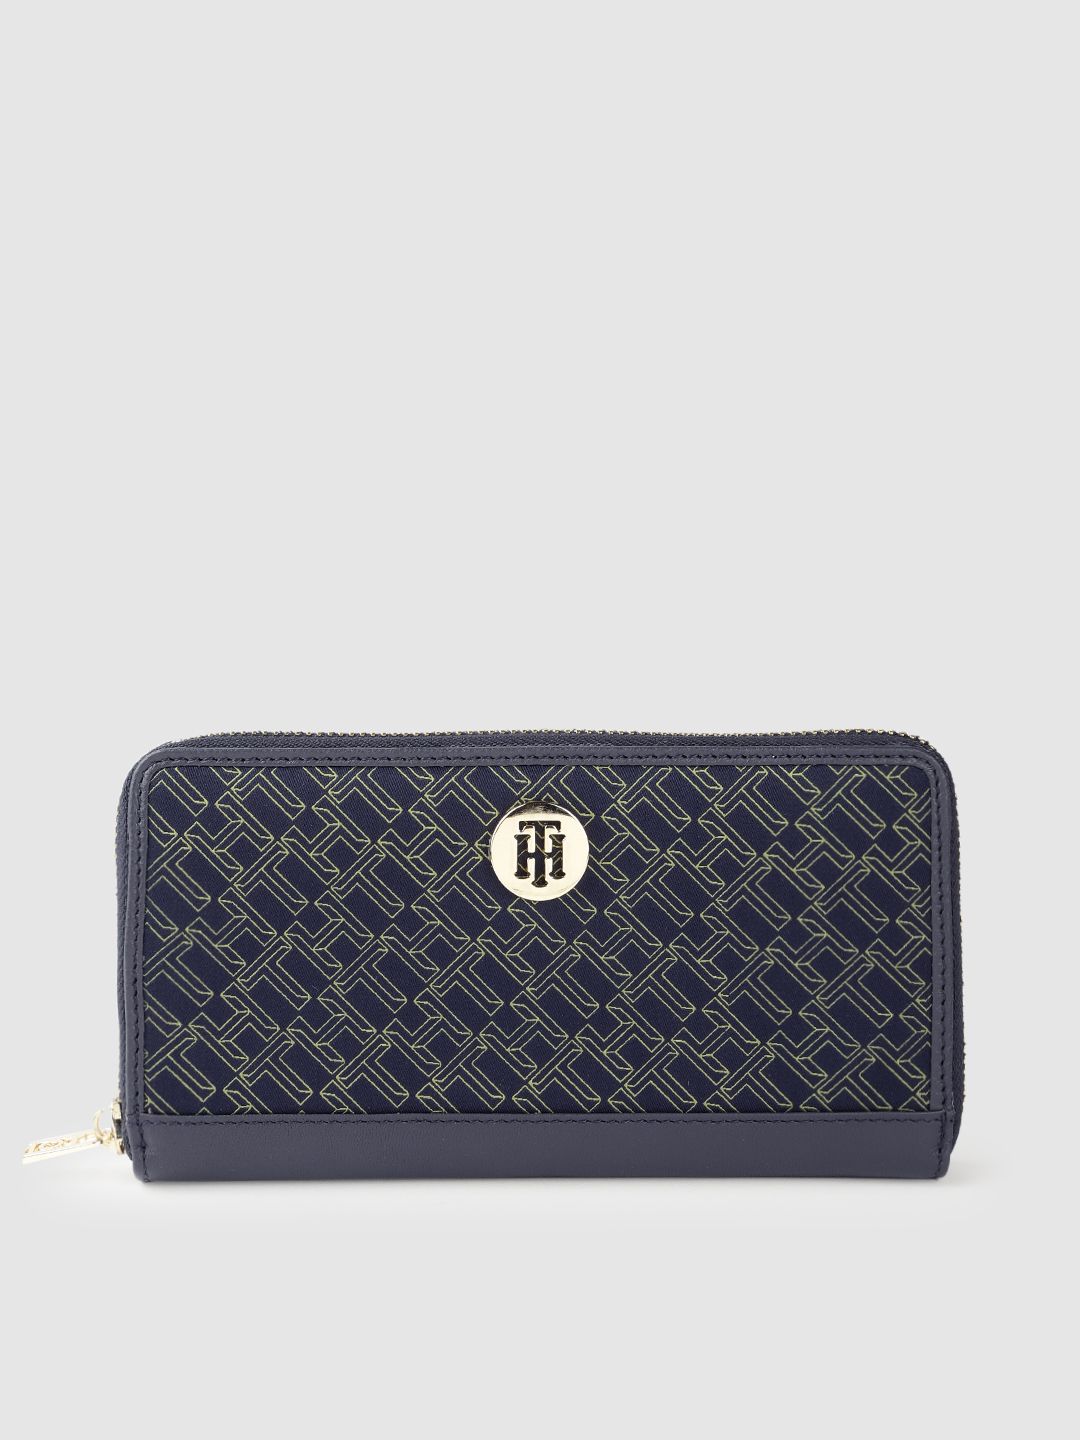 Tommy Hilfiger Women Navy Blue Typography Embellished Two Fold Leather Wallet Price in India